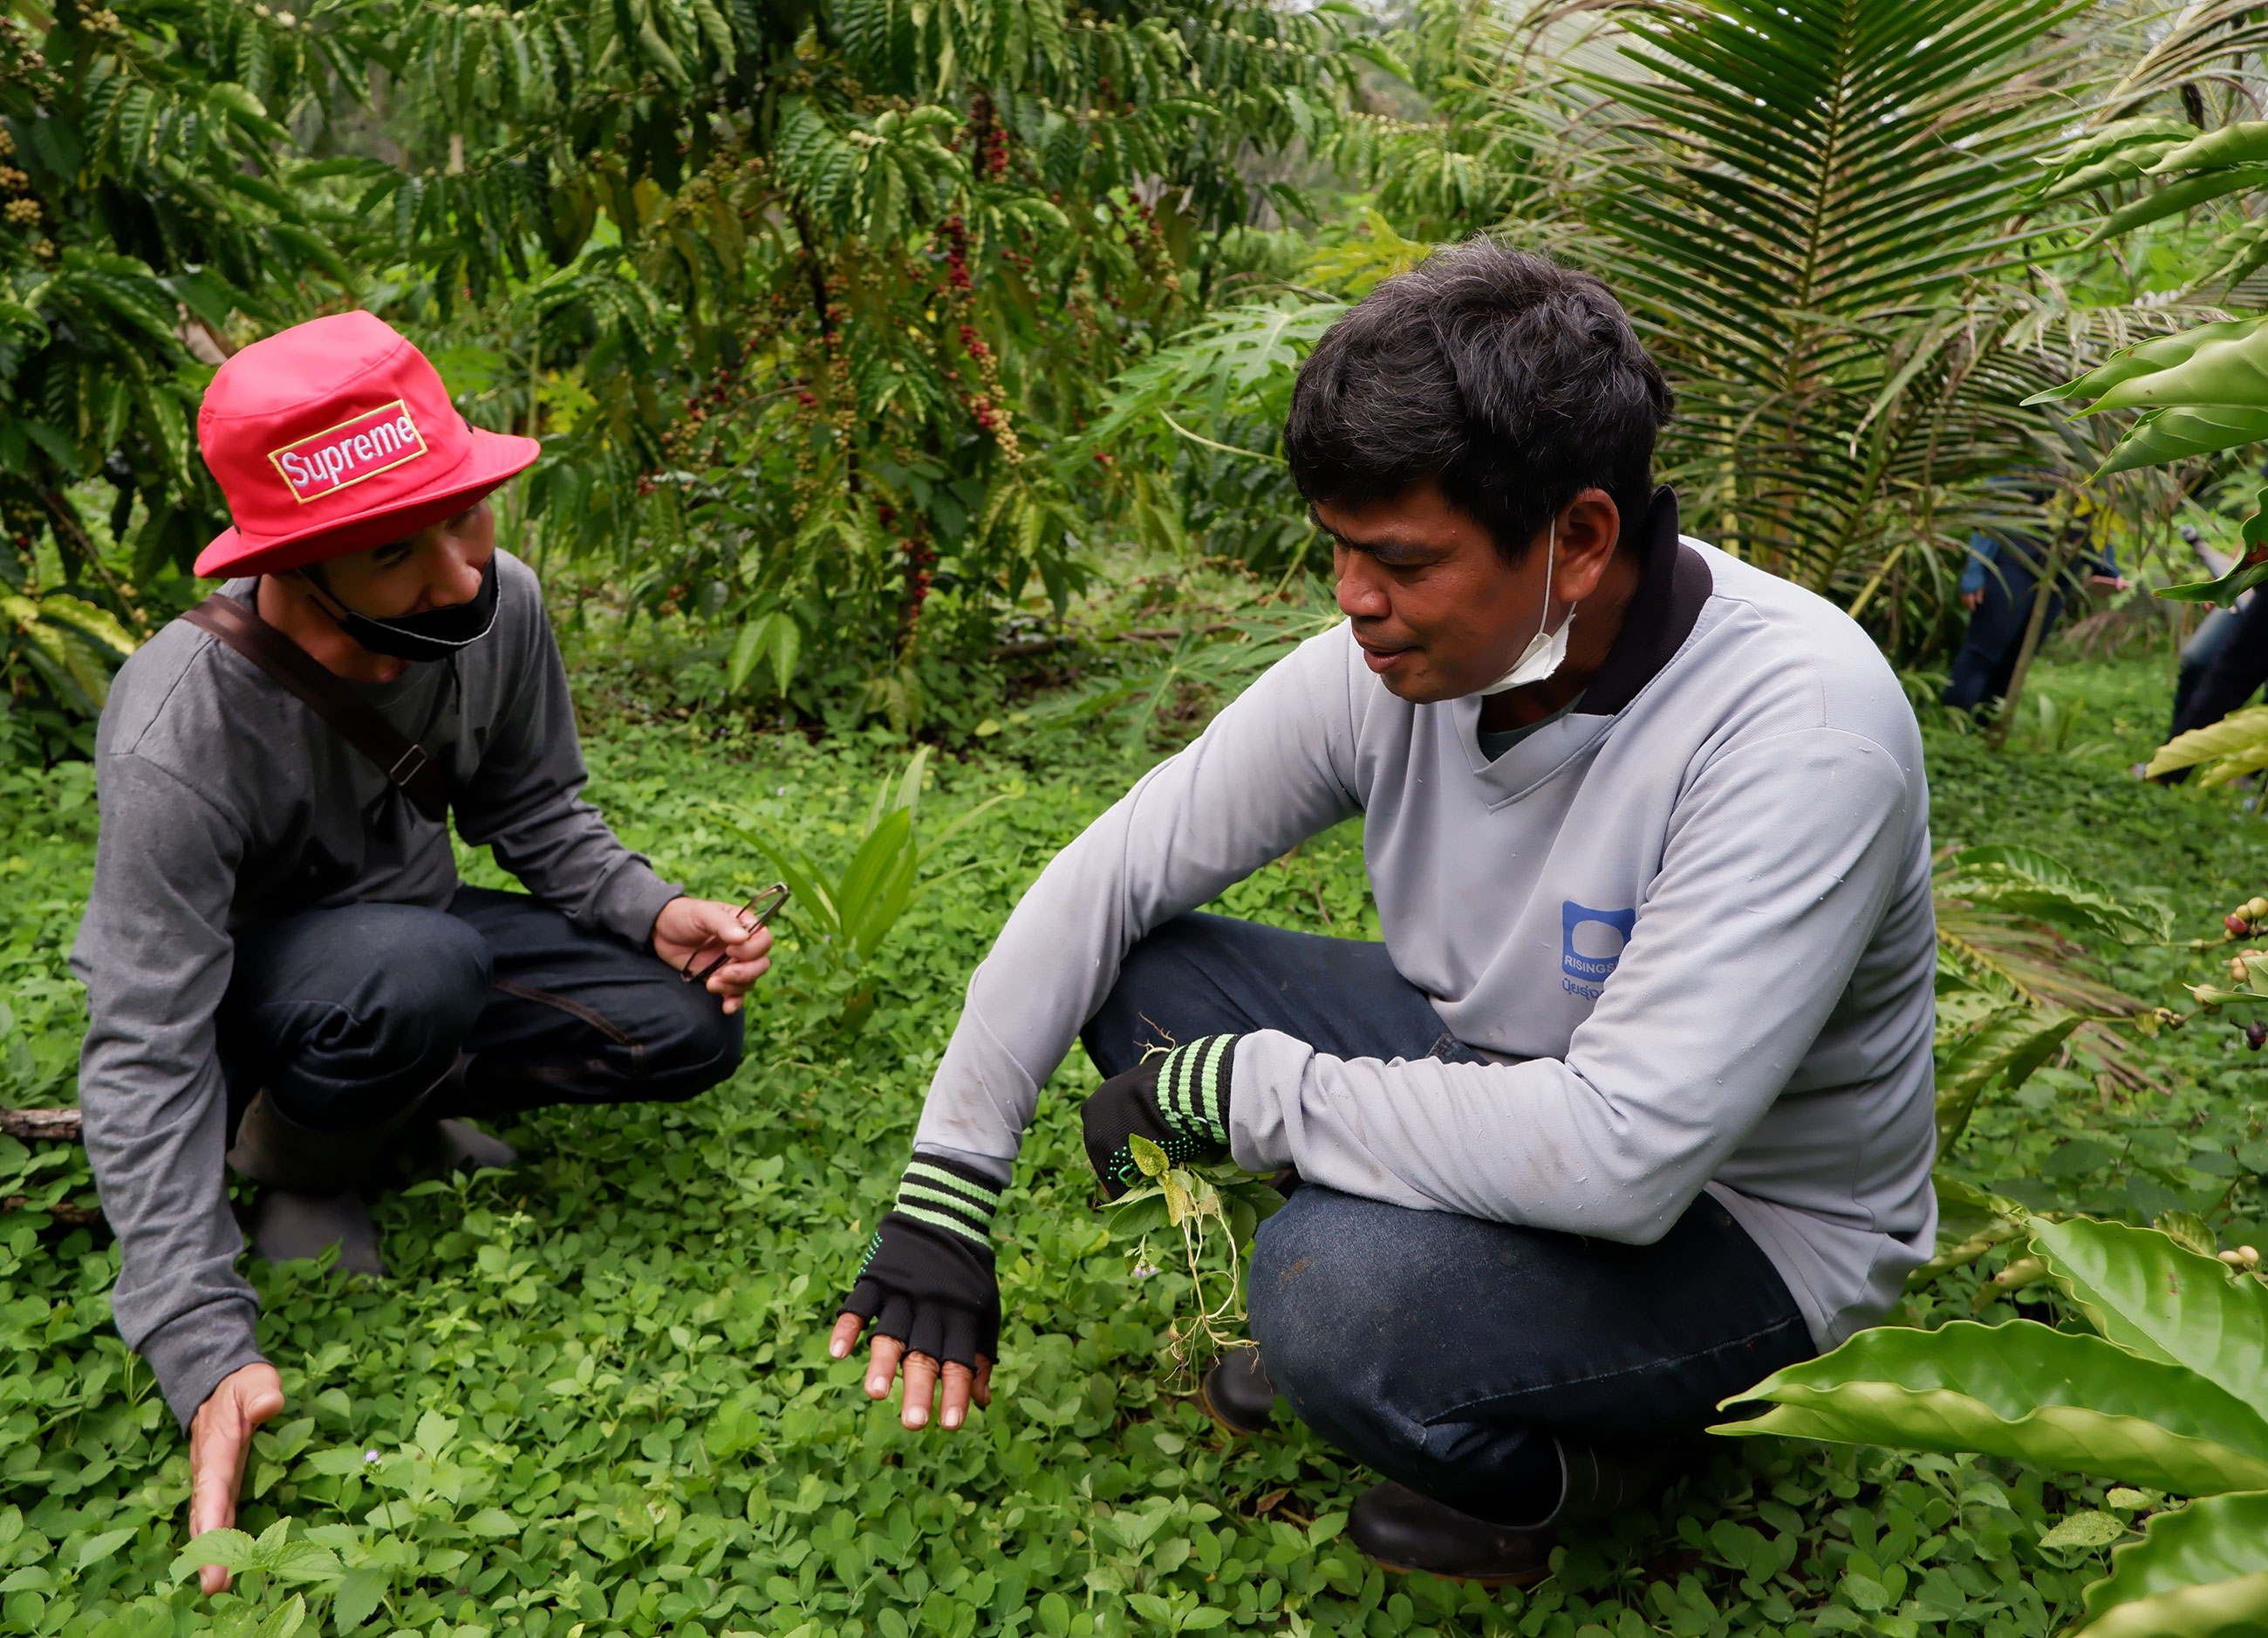 Mr. Pichet Niambandit, owner of the coffee demonstration plot, explains to Mr. Sakol Piewkham, who owns a demonstration plot with an integrated coffee farming system similar to that of Khun Pichet and a member of Huai Nai Roi Community Coffee Farmer Group, about growing Arachis Pintoi as a cover crop.